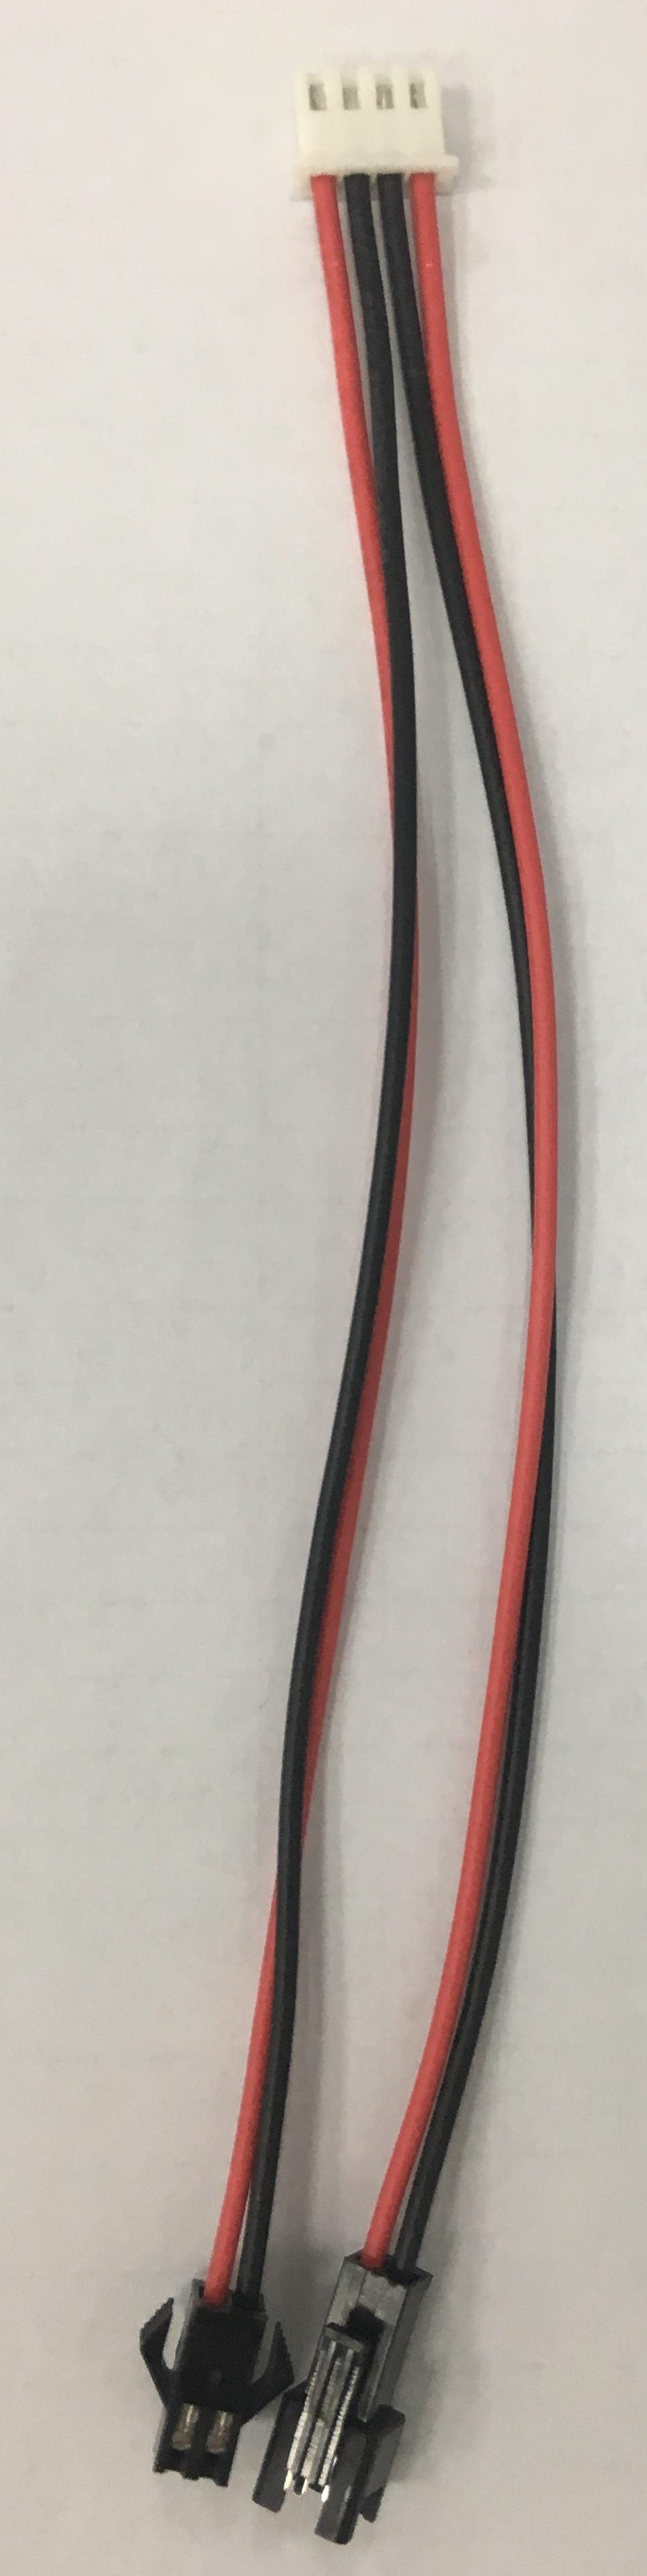 Connecting Wire for Wme3a